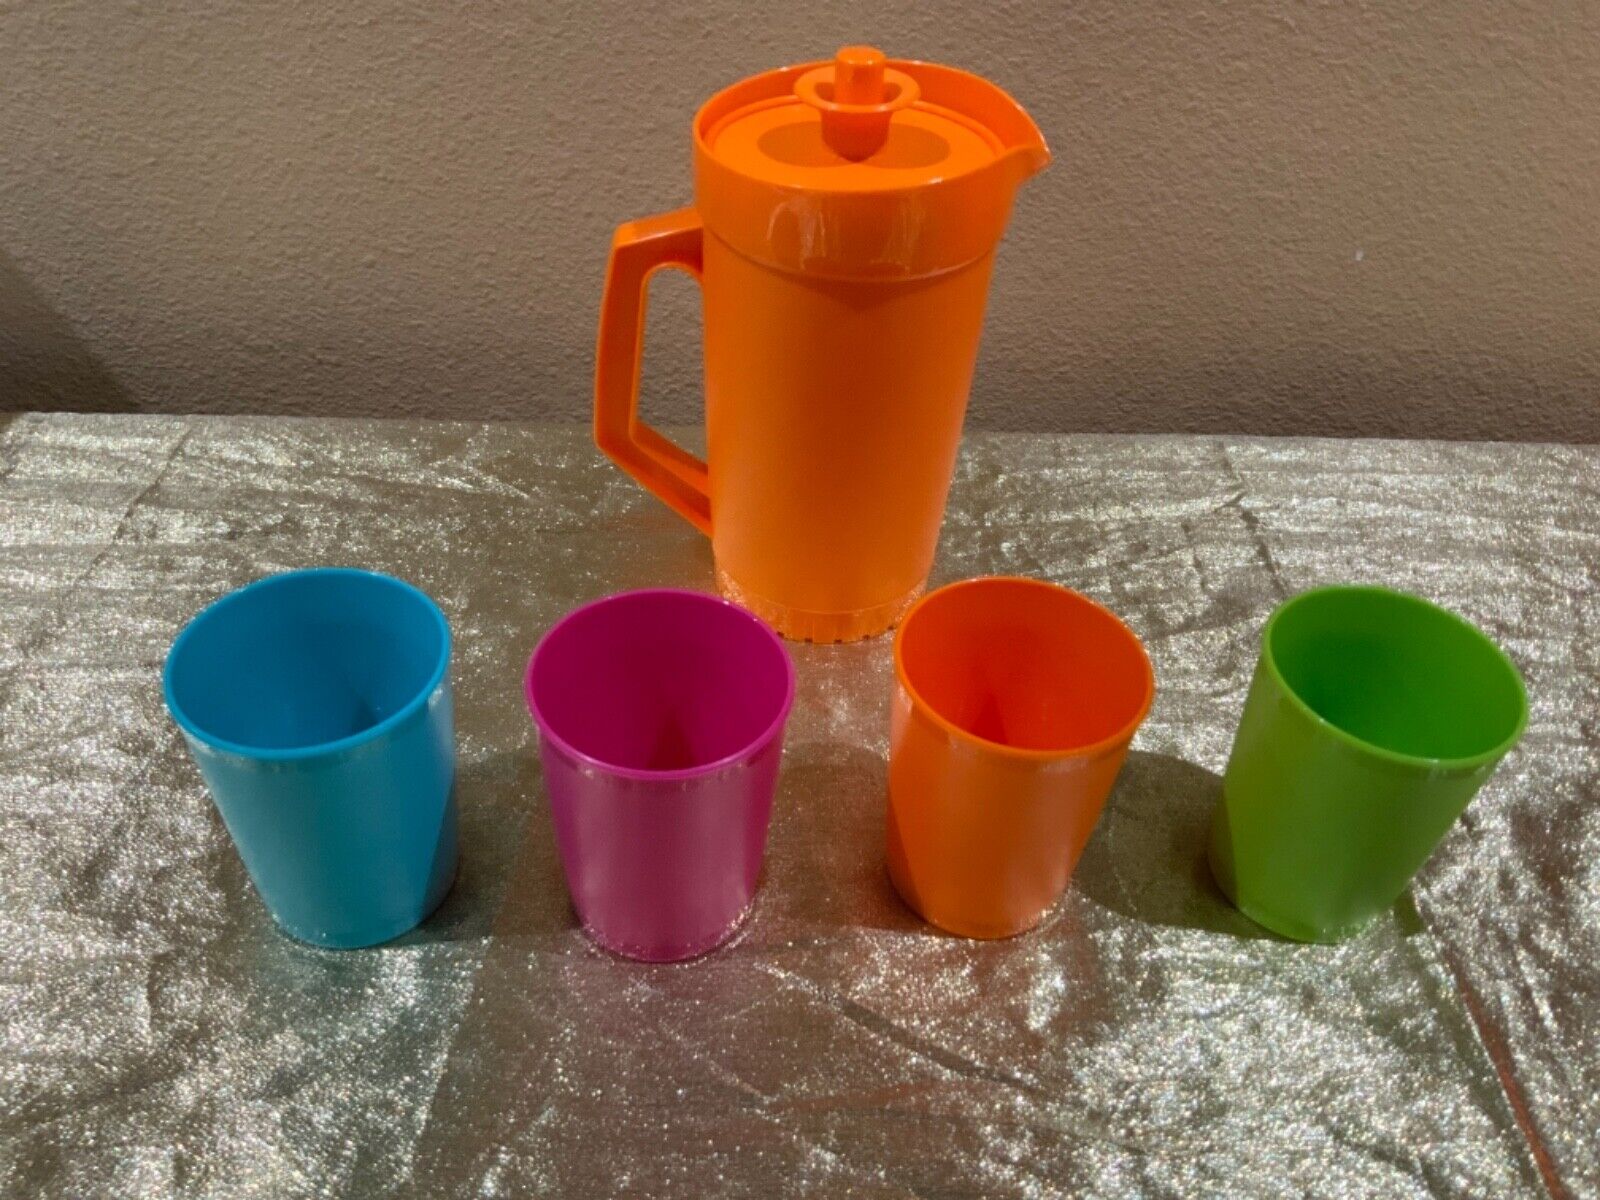 New Tupperware Play Set of Kids Mini Colorful Tumblers and Push Button Pitcher